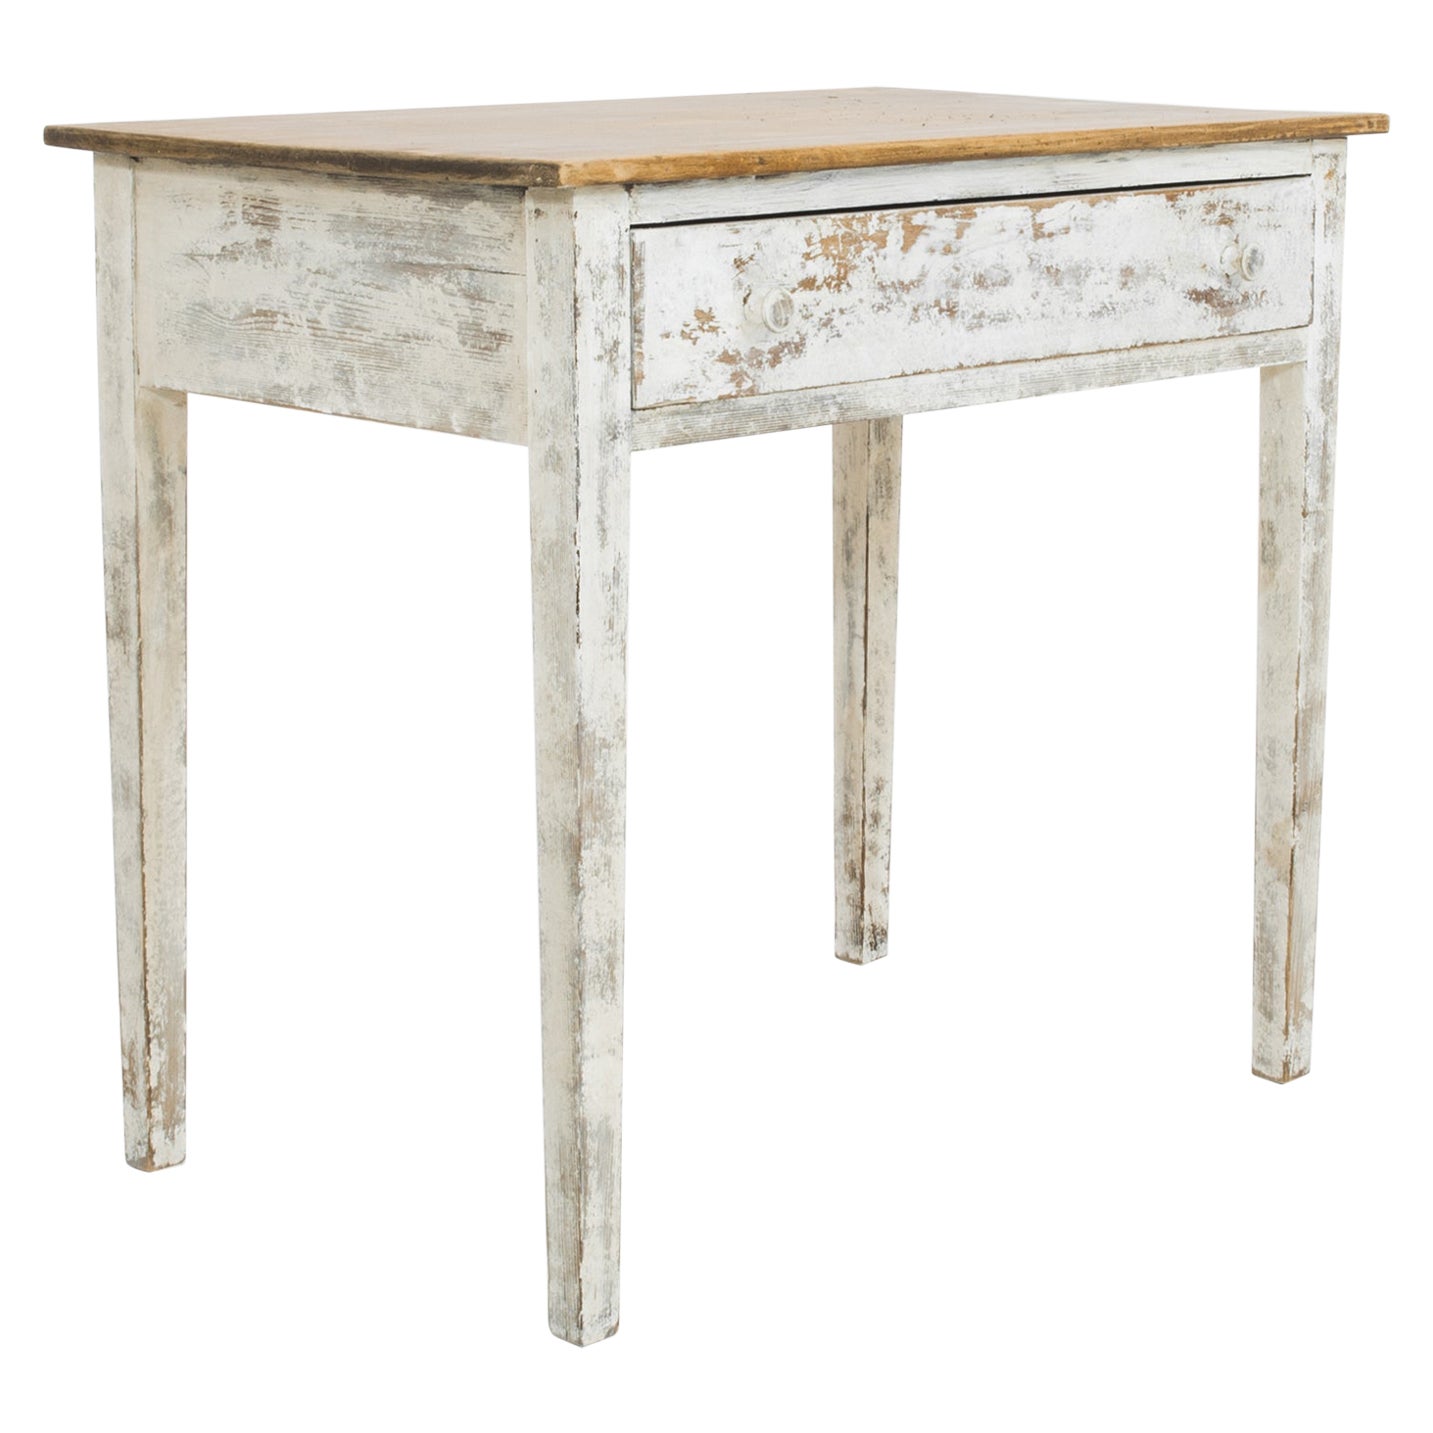 Antique Belgian Rustic Painted Side Table